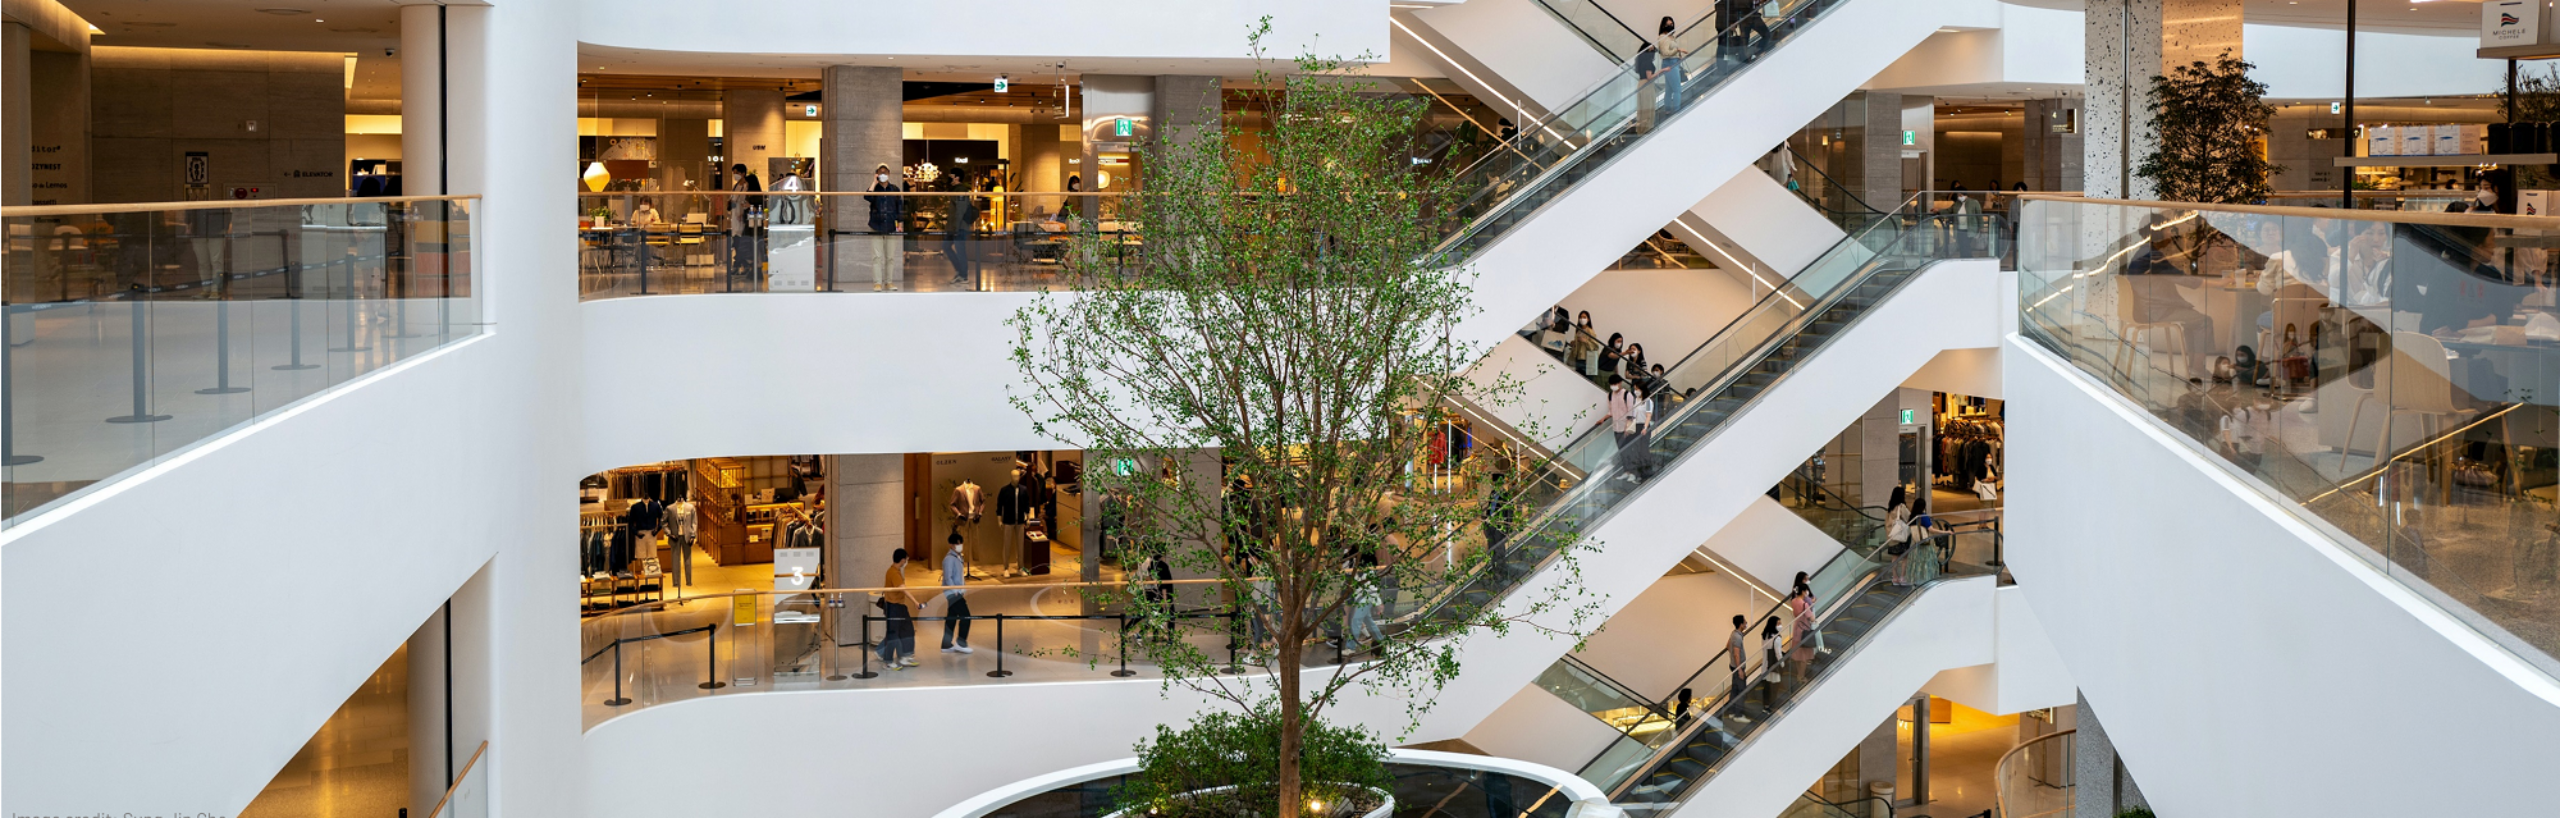 A white multi-level shoppping centre, with a tree in the centre - In-building coverage testing without an engineer on-site